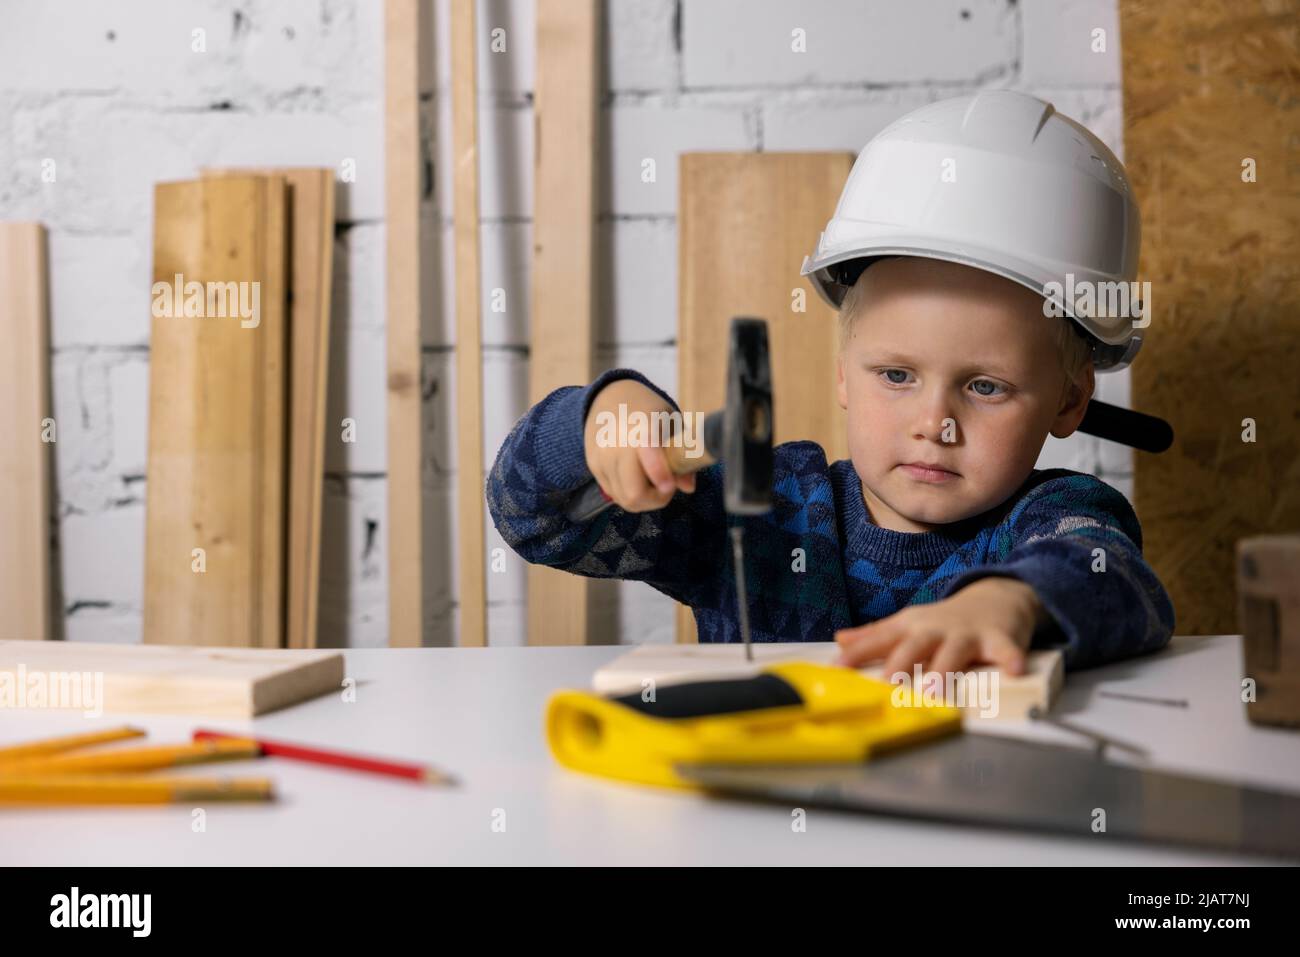 little boy with helmet learn to hammer a nail in wooden plank at carpenters workshop Stock Photo